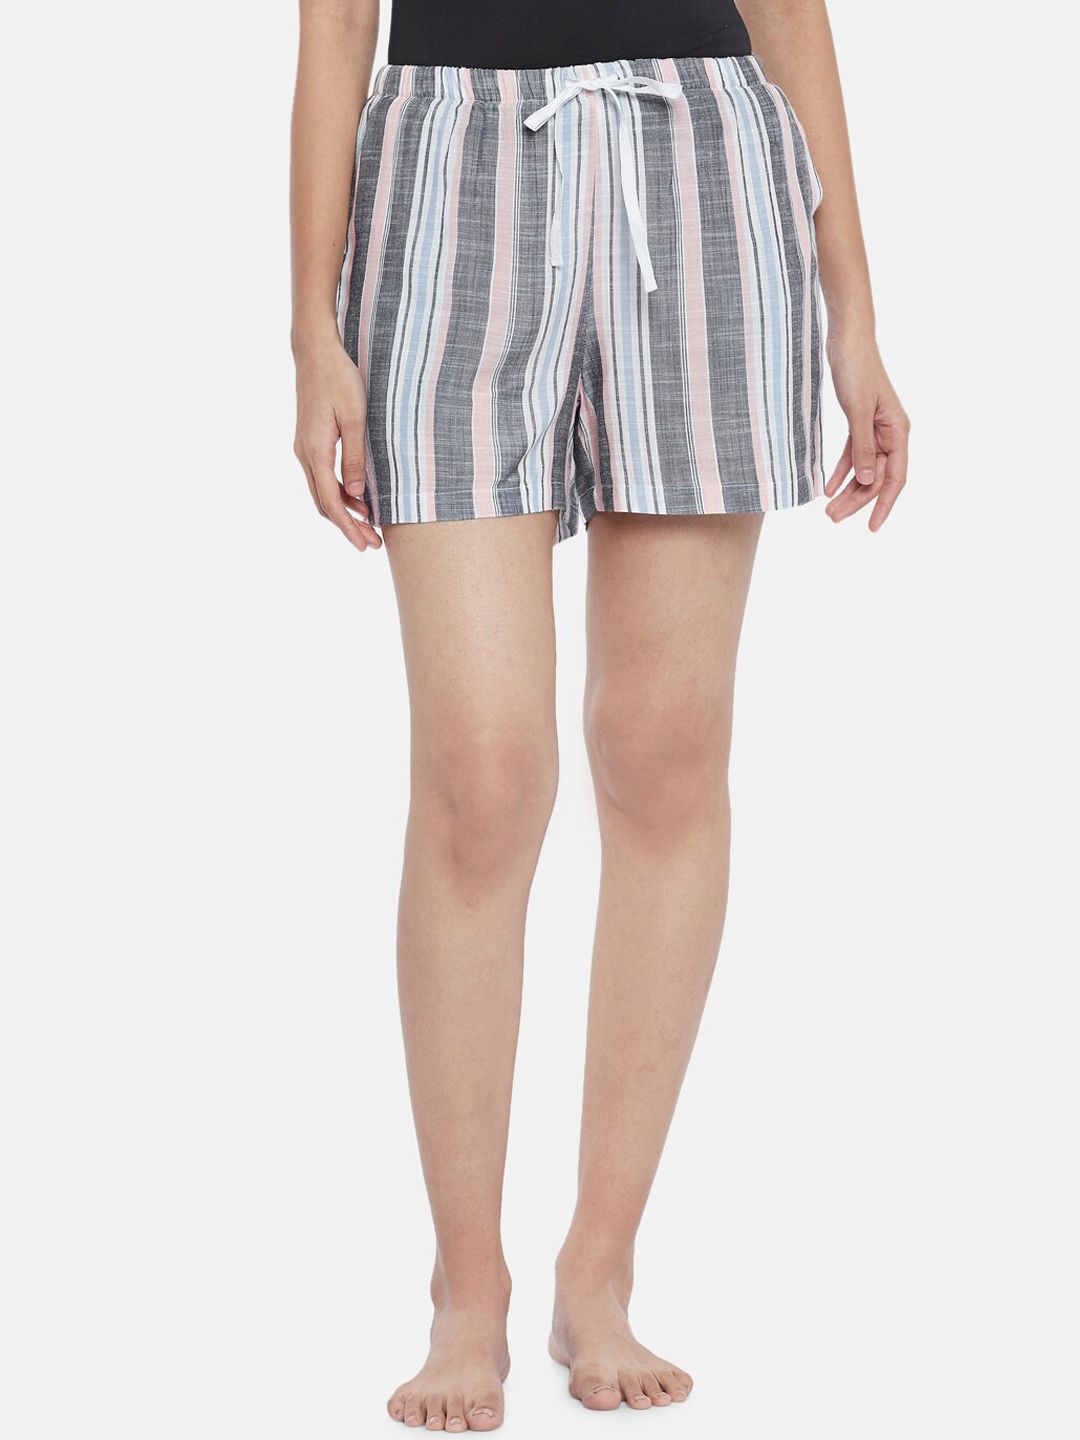 Dreamz by Pantaloons Woman White Striped Lounge Shorts Price in India